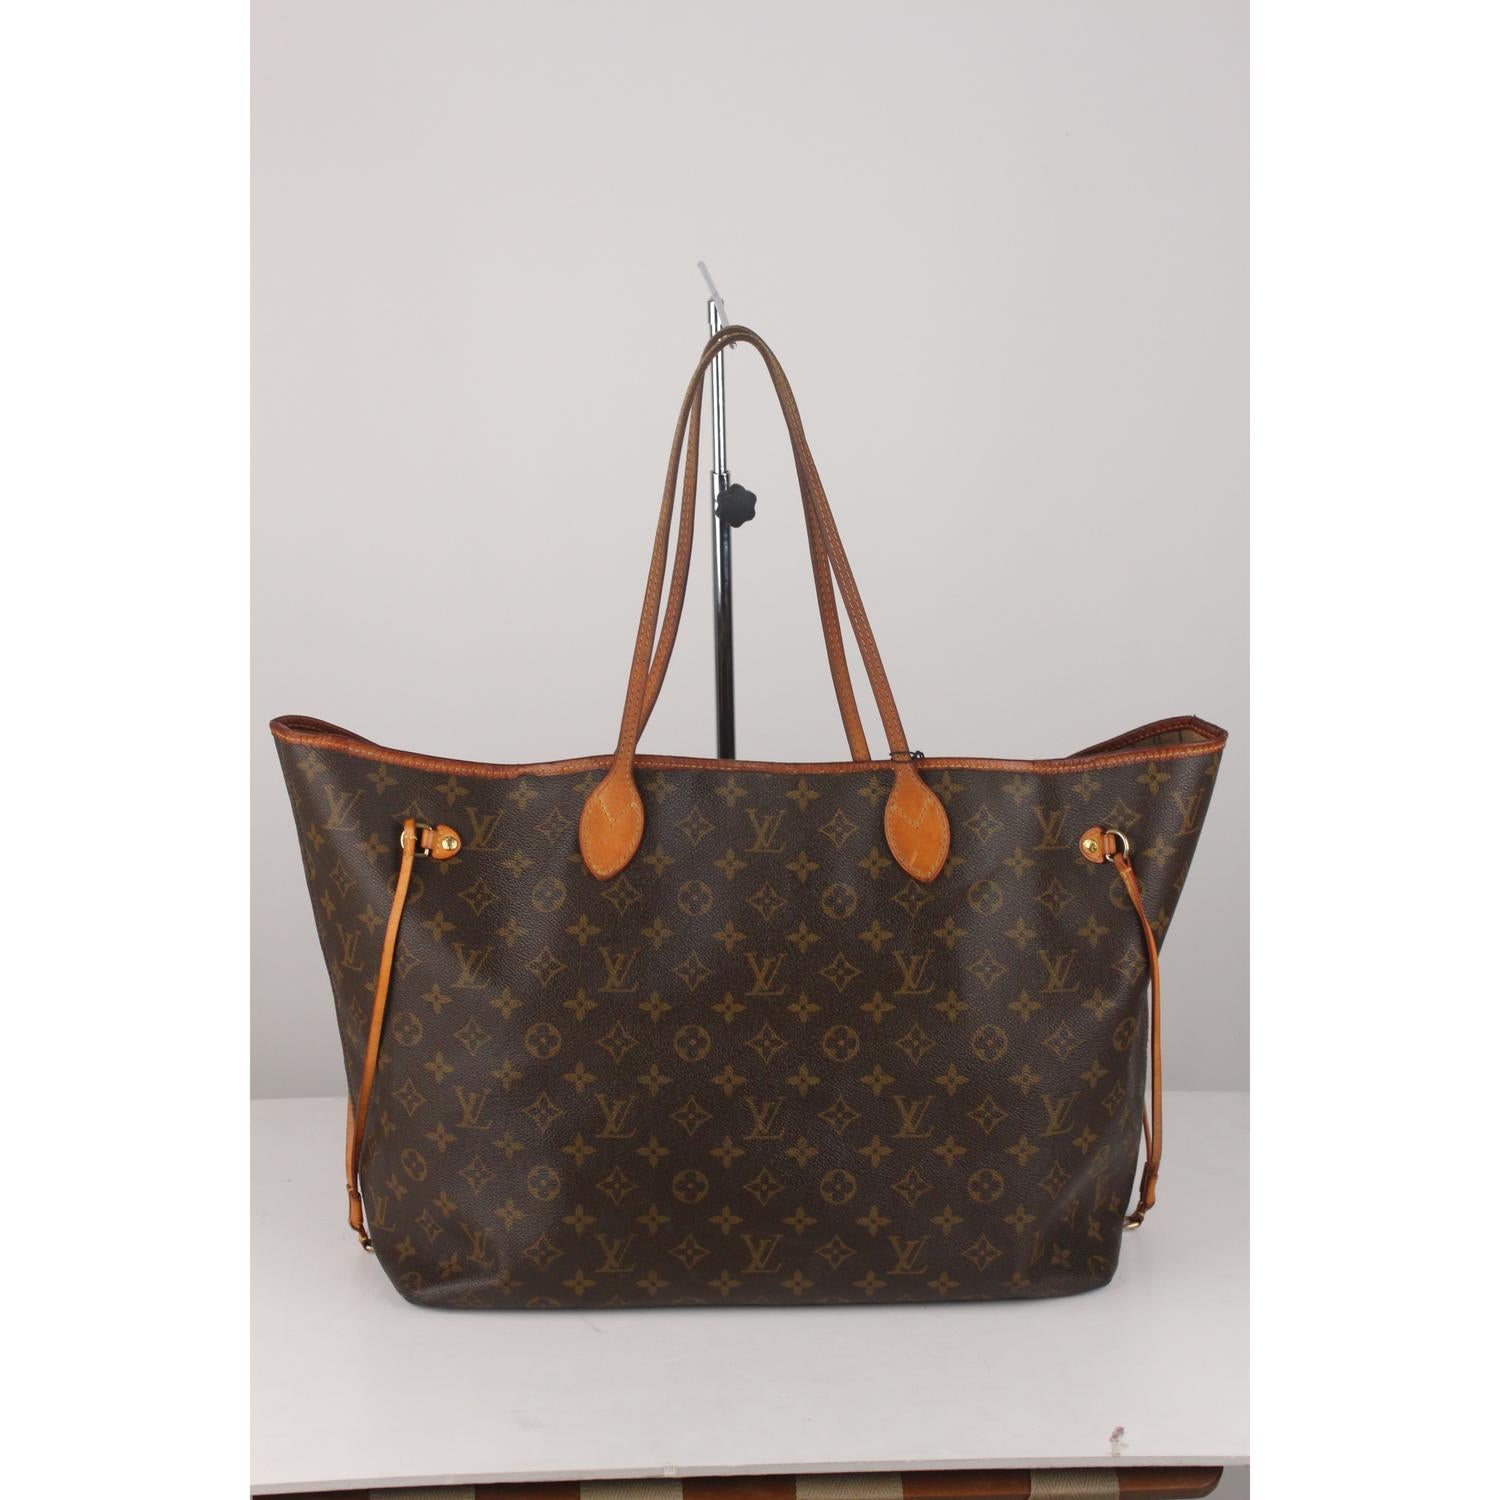 - Monogram canvas with leather trim and handles
- Redesigned interior with Louis Vuitton archive details
- Textile-lined inside zip pocket & D-ring
- Golden color metallic pieces 

Logos / Tags: LV - LOUIS VUITTON Monograms all over the bag, 'LOUIS